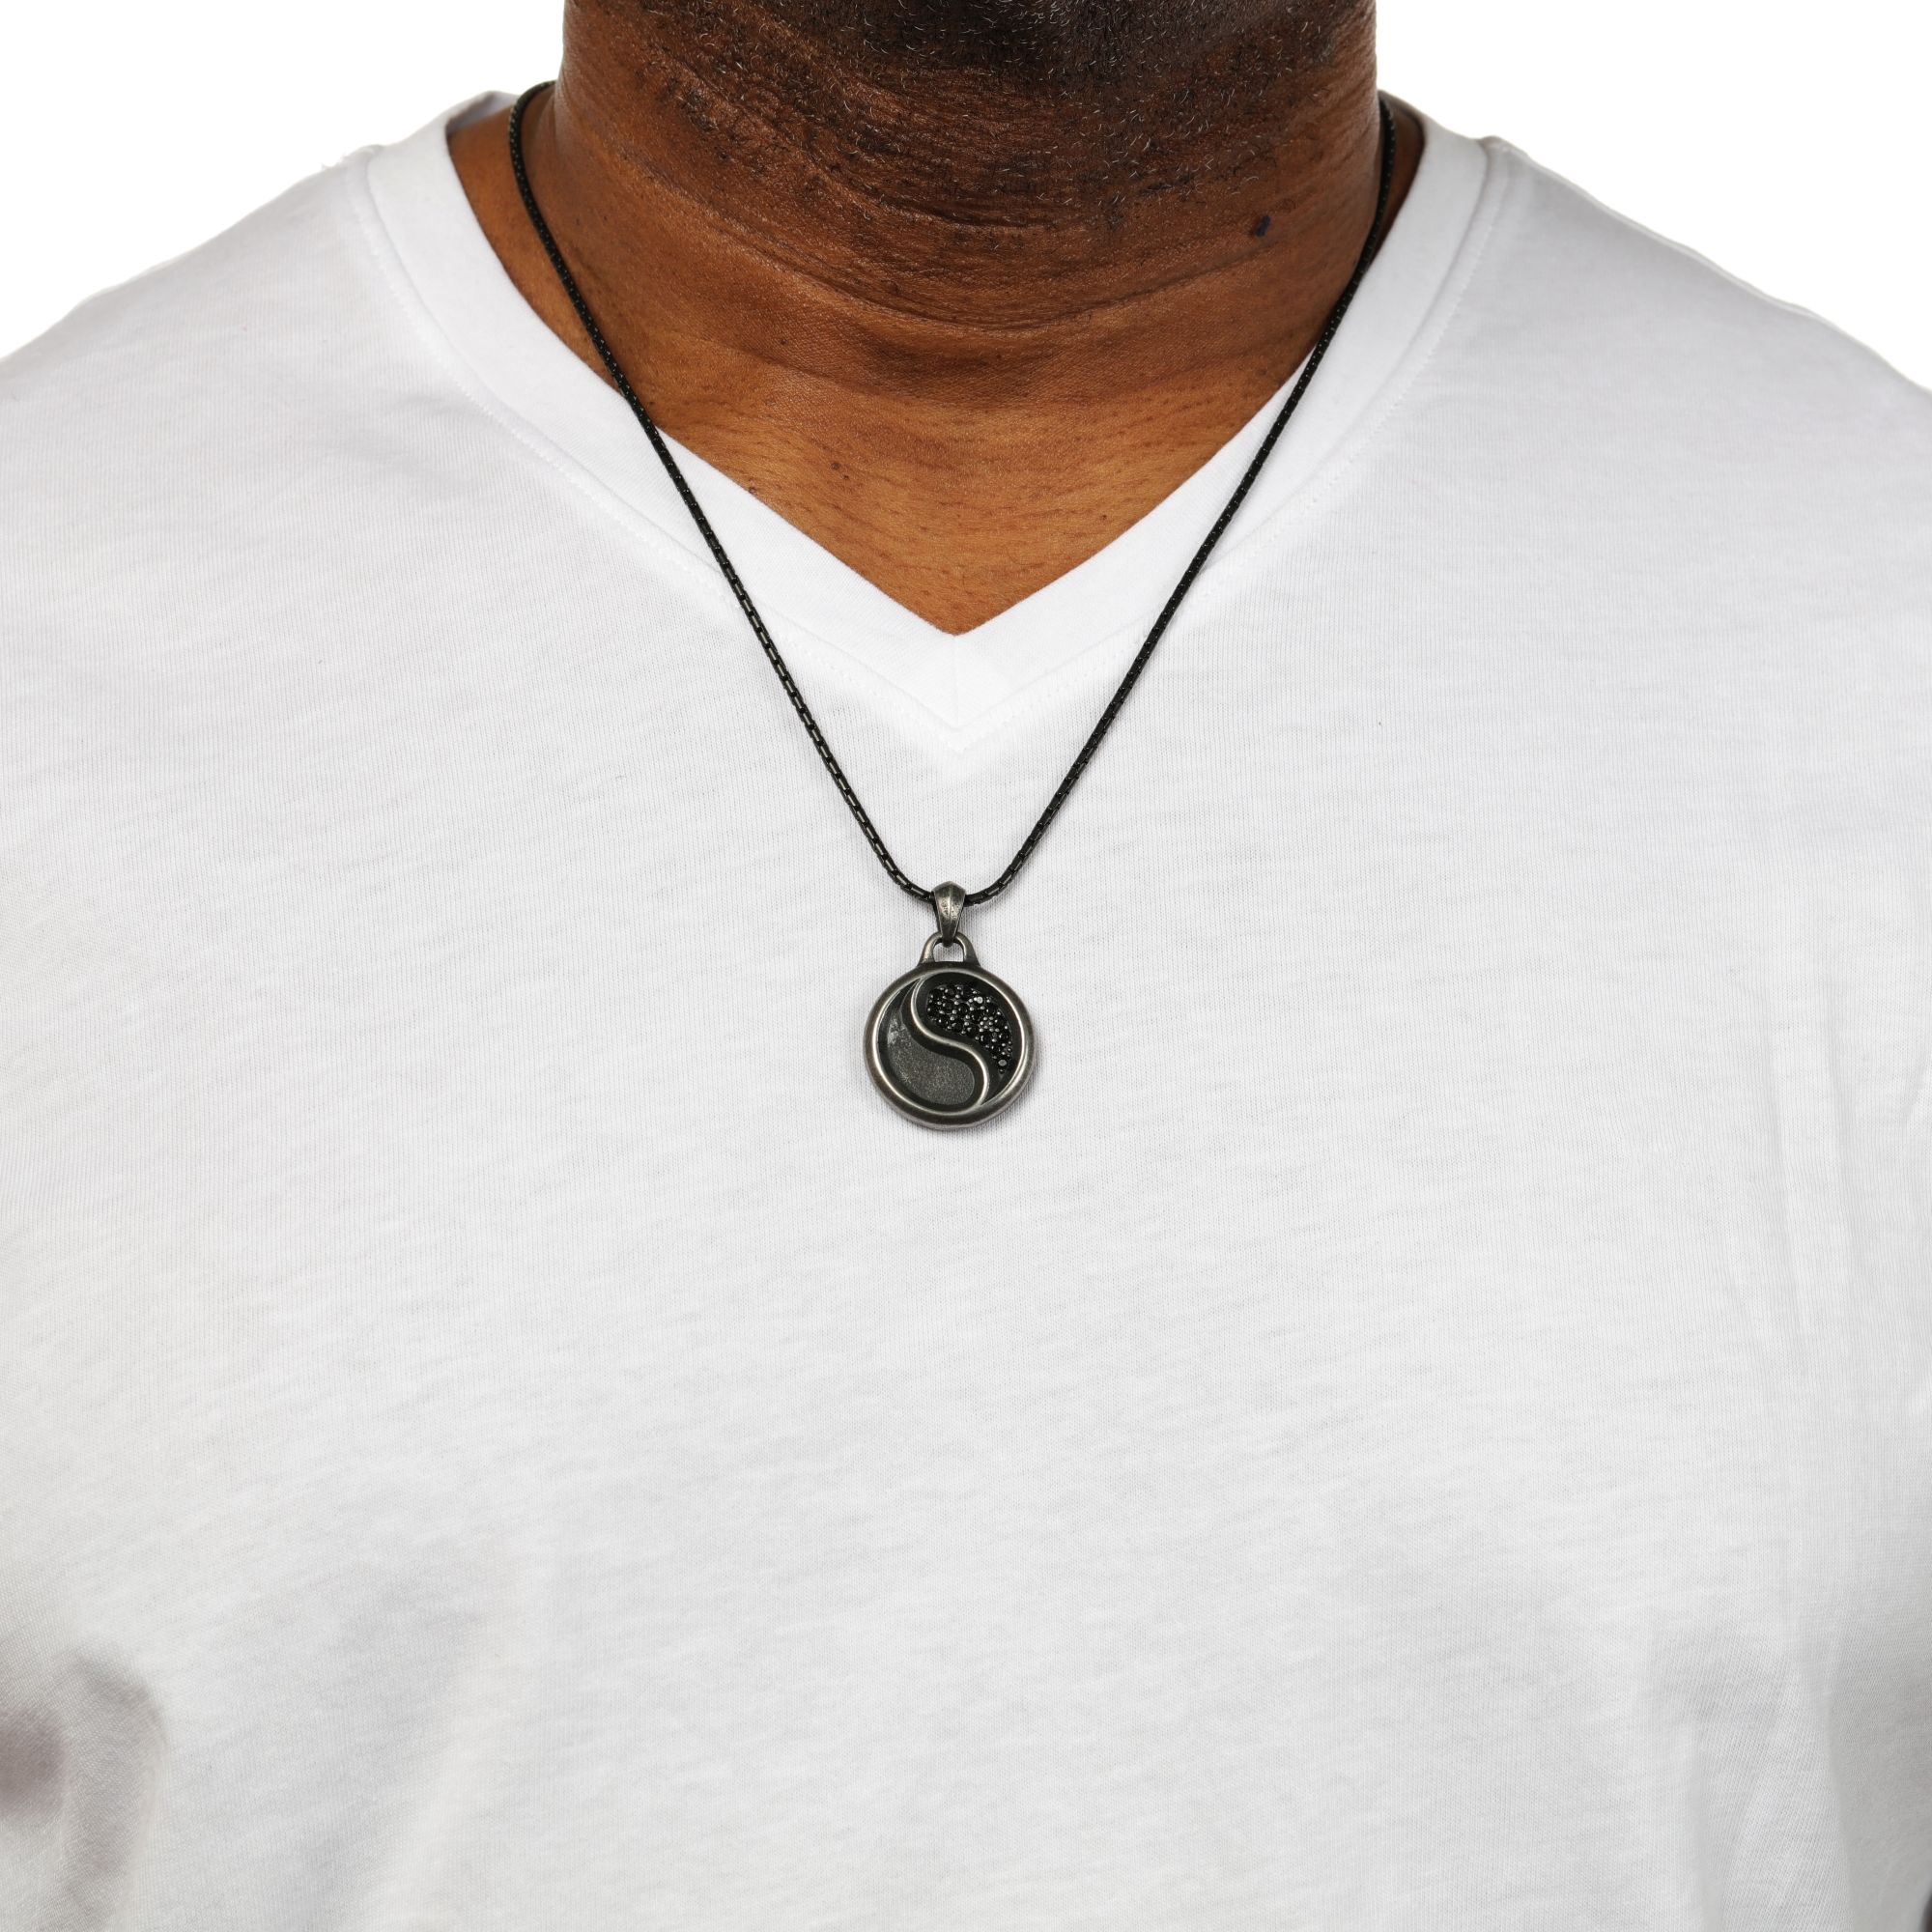 49758-pendant-mens-collection-stainless-steel-black-cubic-zirconia-round-1-4mm-49758-2.jpg